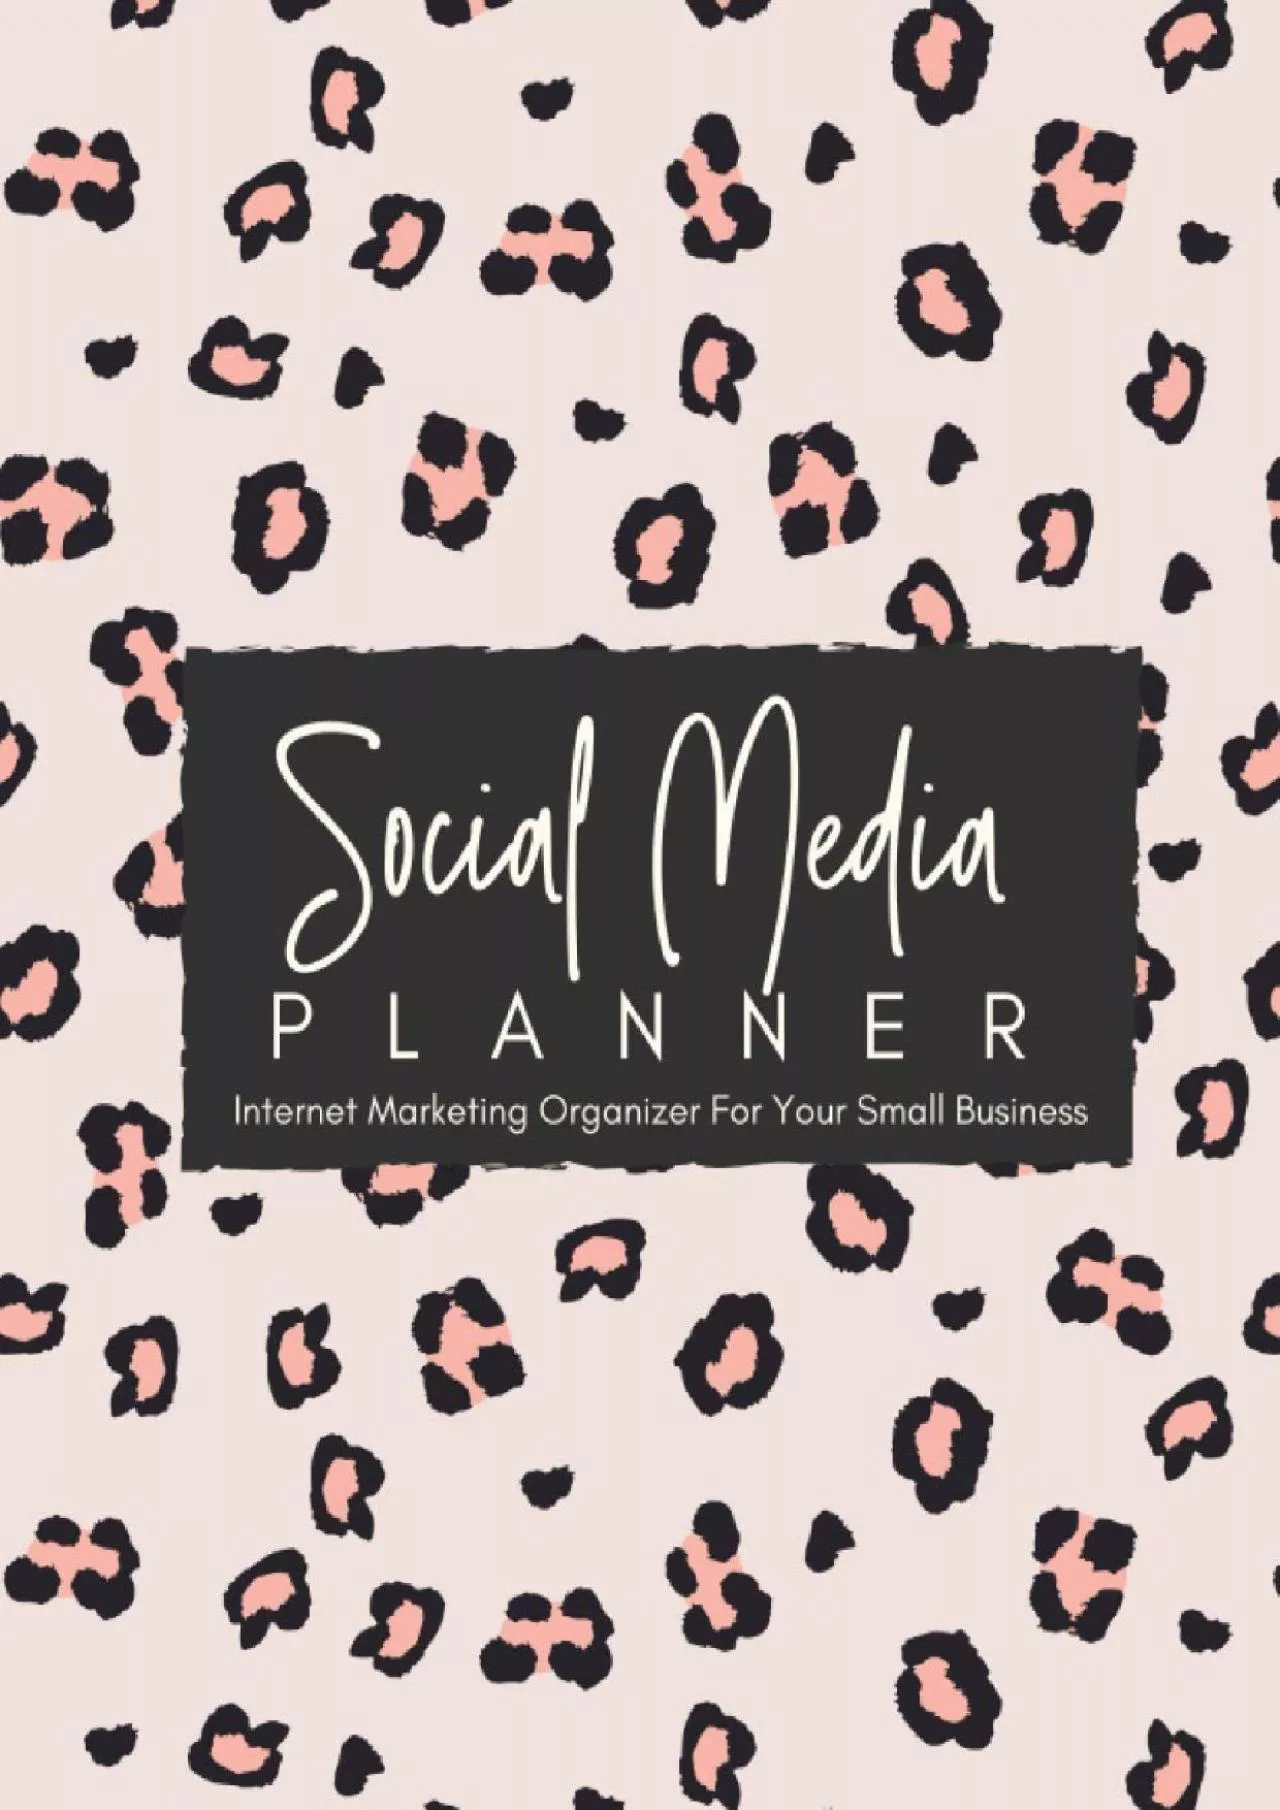 Social Media Planner: Internet Marketing Organizer For Your Small Business, Leopard Print